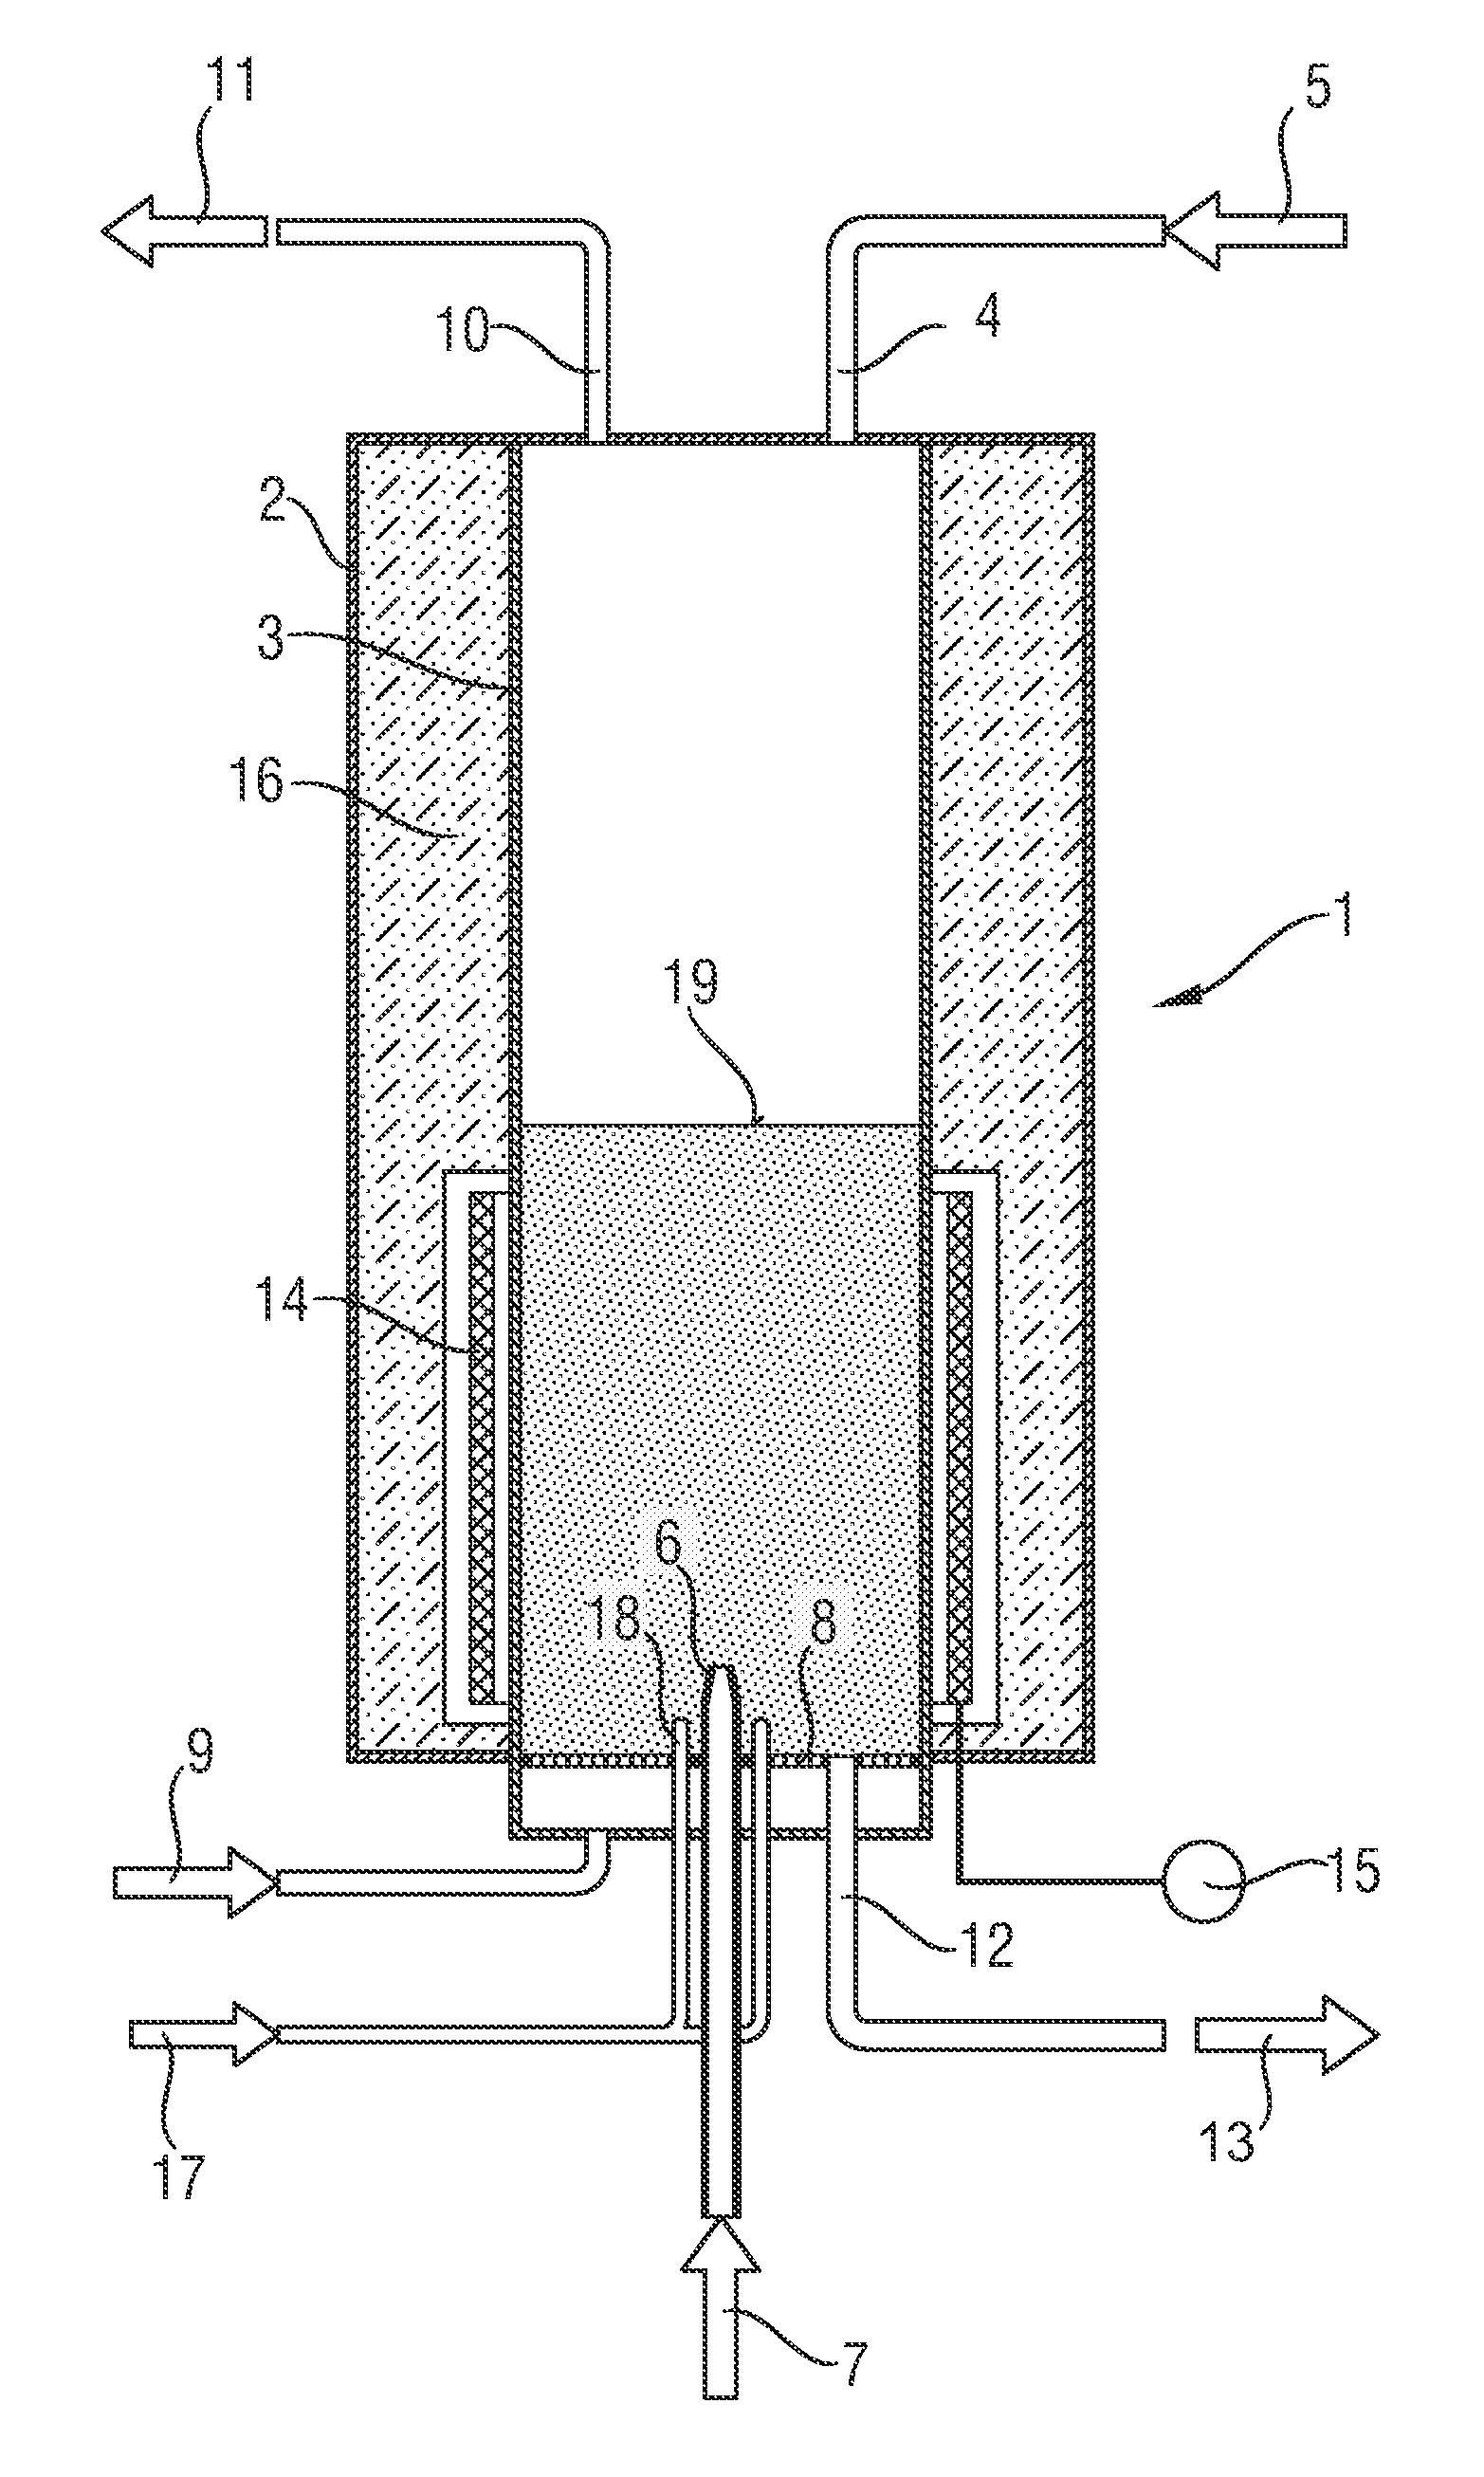 Method and device for producing granulated polycrystalline silicon in a fluidized bed reactor